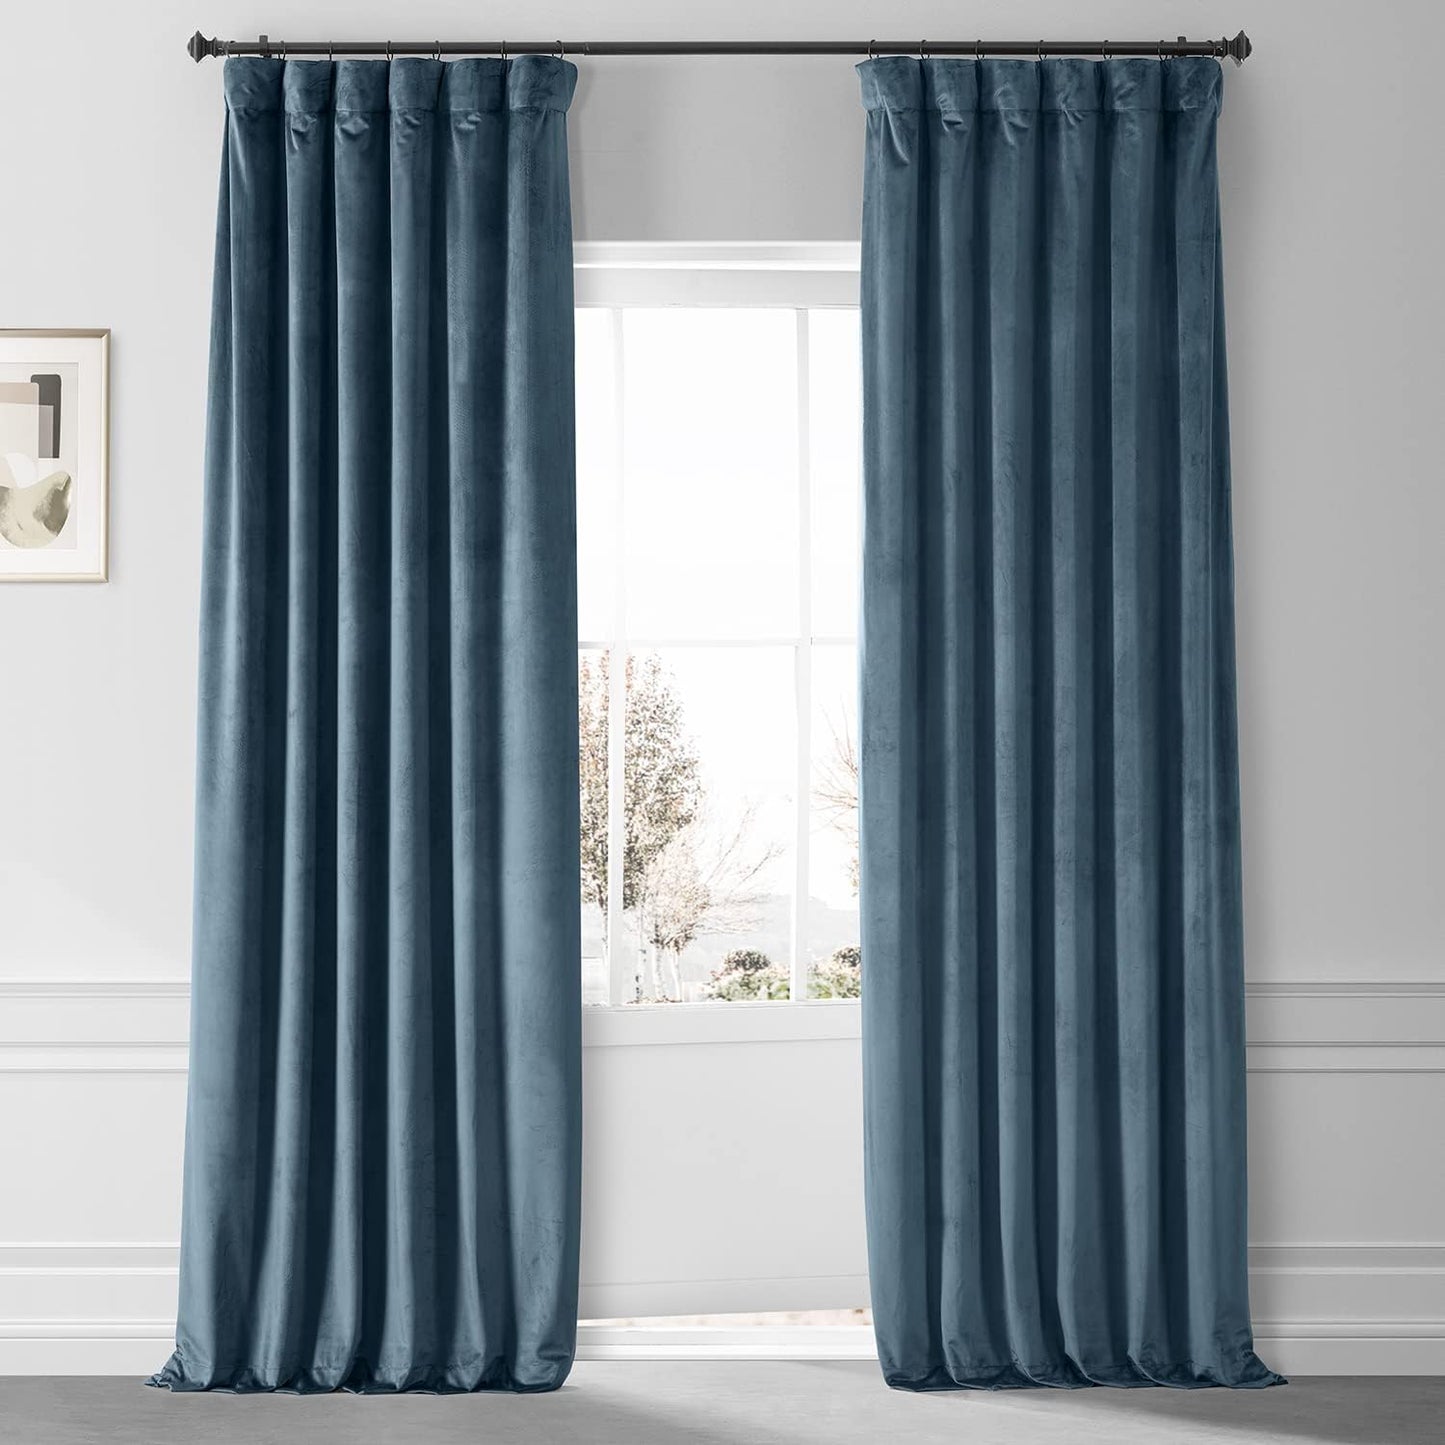 HPD HALF PRICE DRAPES Blackout Solid Thermal Insulated Window Curtain 50 X 96 Signature Plush Velvet Curtains for Bedroom & Living Room (1 Panel), VPYC-SBO198593-96, Diva Cream  Exclusive Fabrics & Furnishings Oxford Blue 50 X 96 